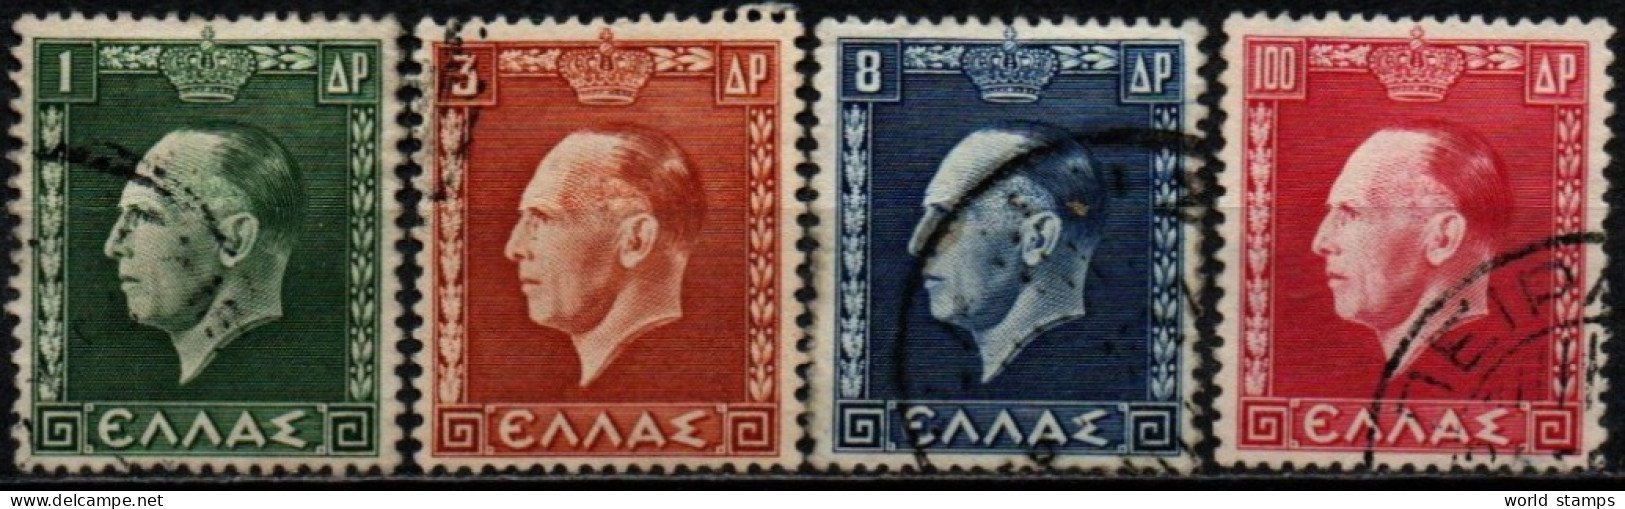 GRECE 1937 O - Used Stamps